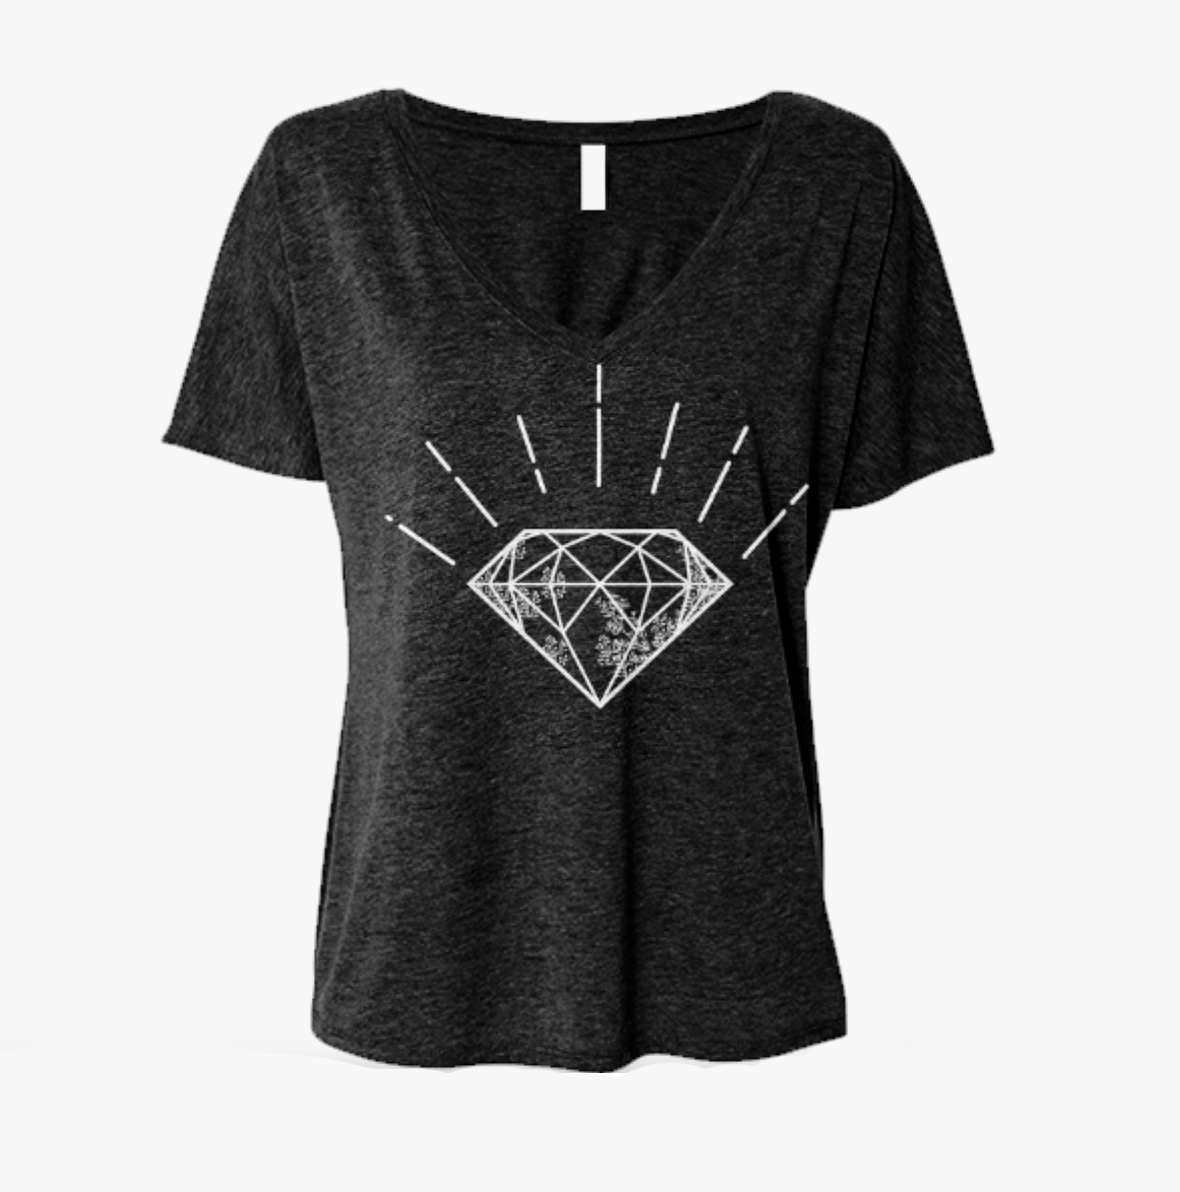 Perfectly Imperfect - Diamond - Slouchy & Soft V Neck T-shirt by Midwinter Co. - Midwinter Co. Alternative Bridal Rings and Modern Fine Jewelry